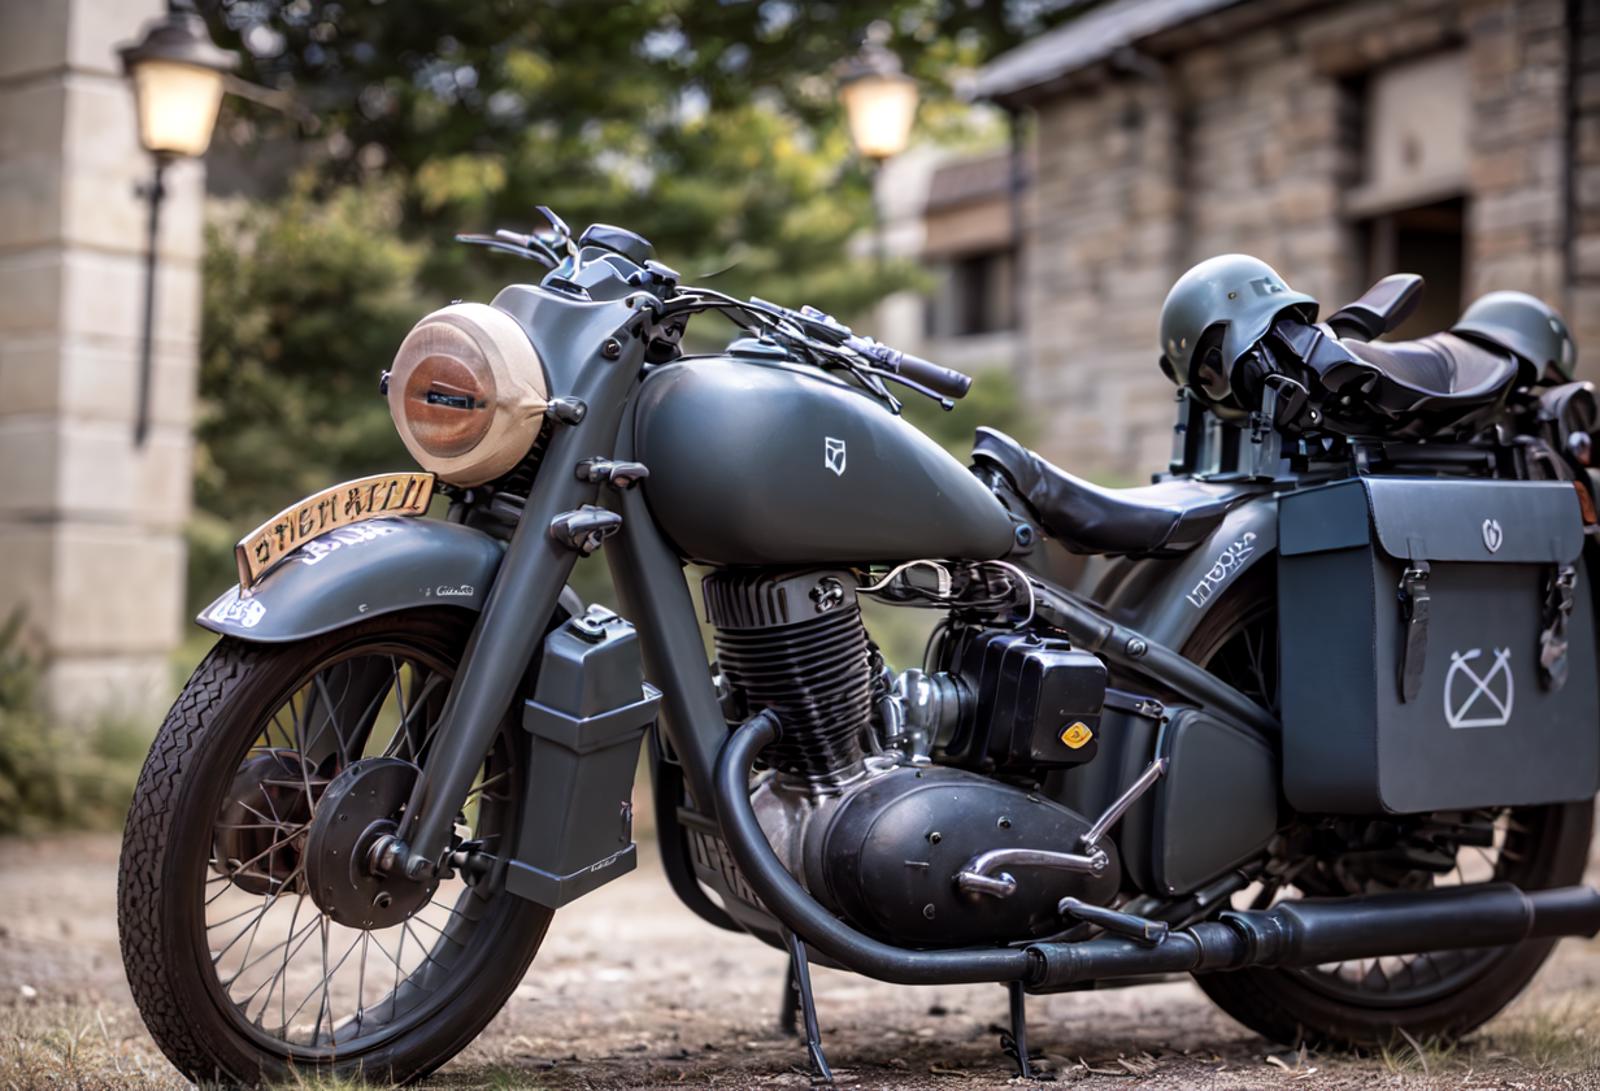 DKW NZ350 image by ehowton